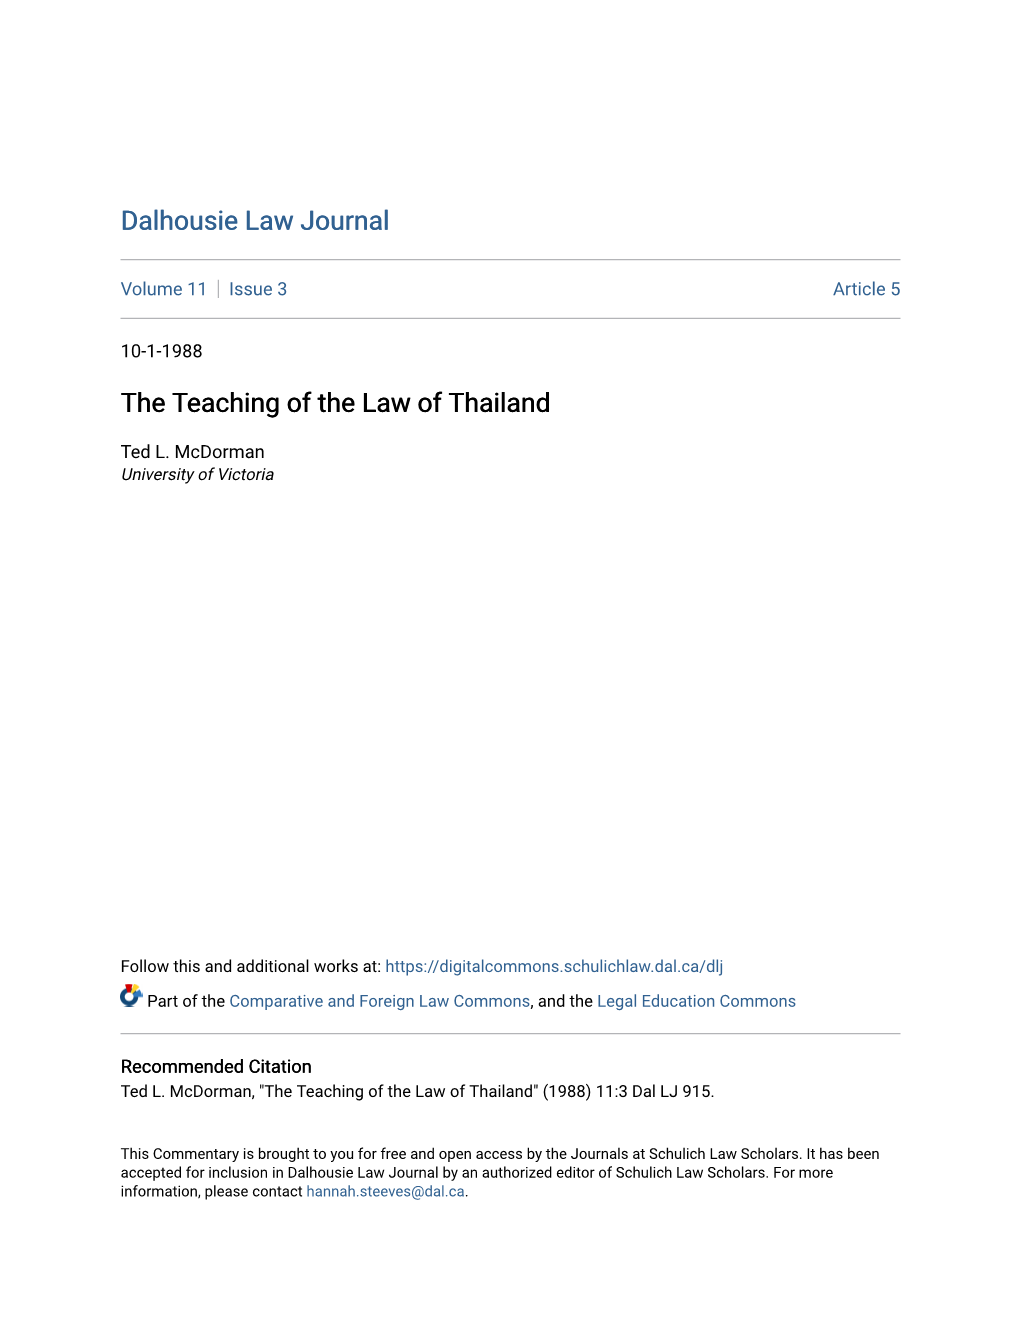 The Teaching of the Law of Thailand